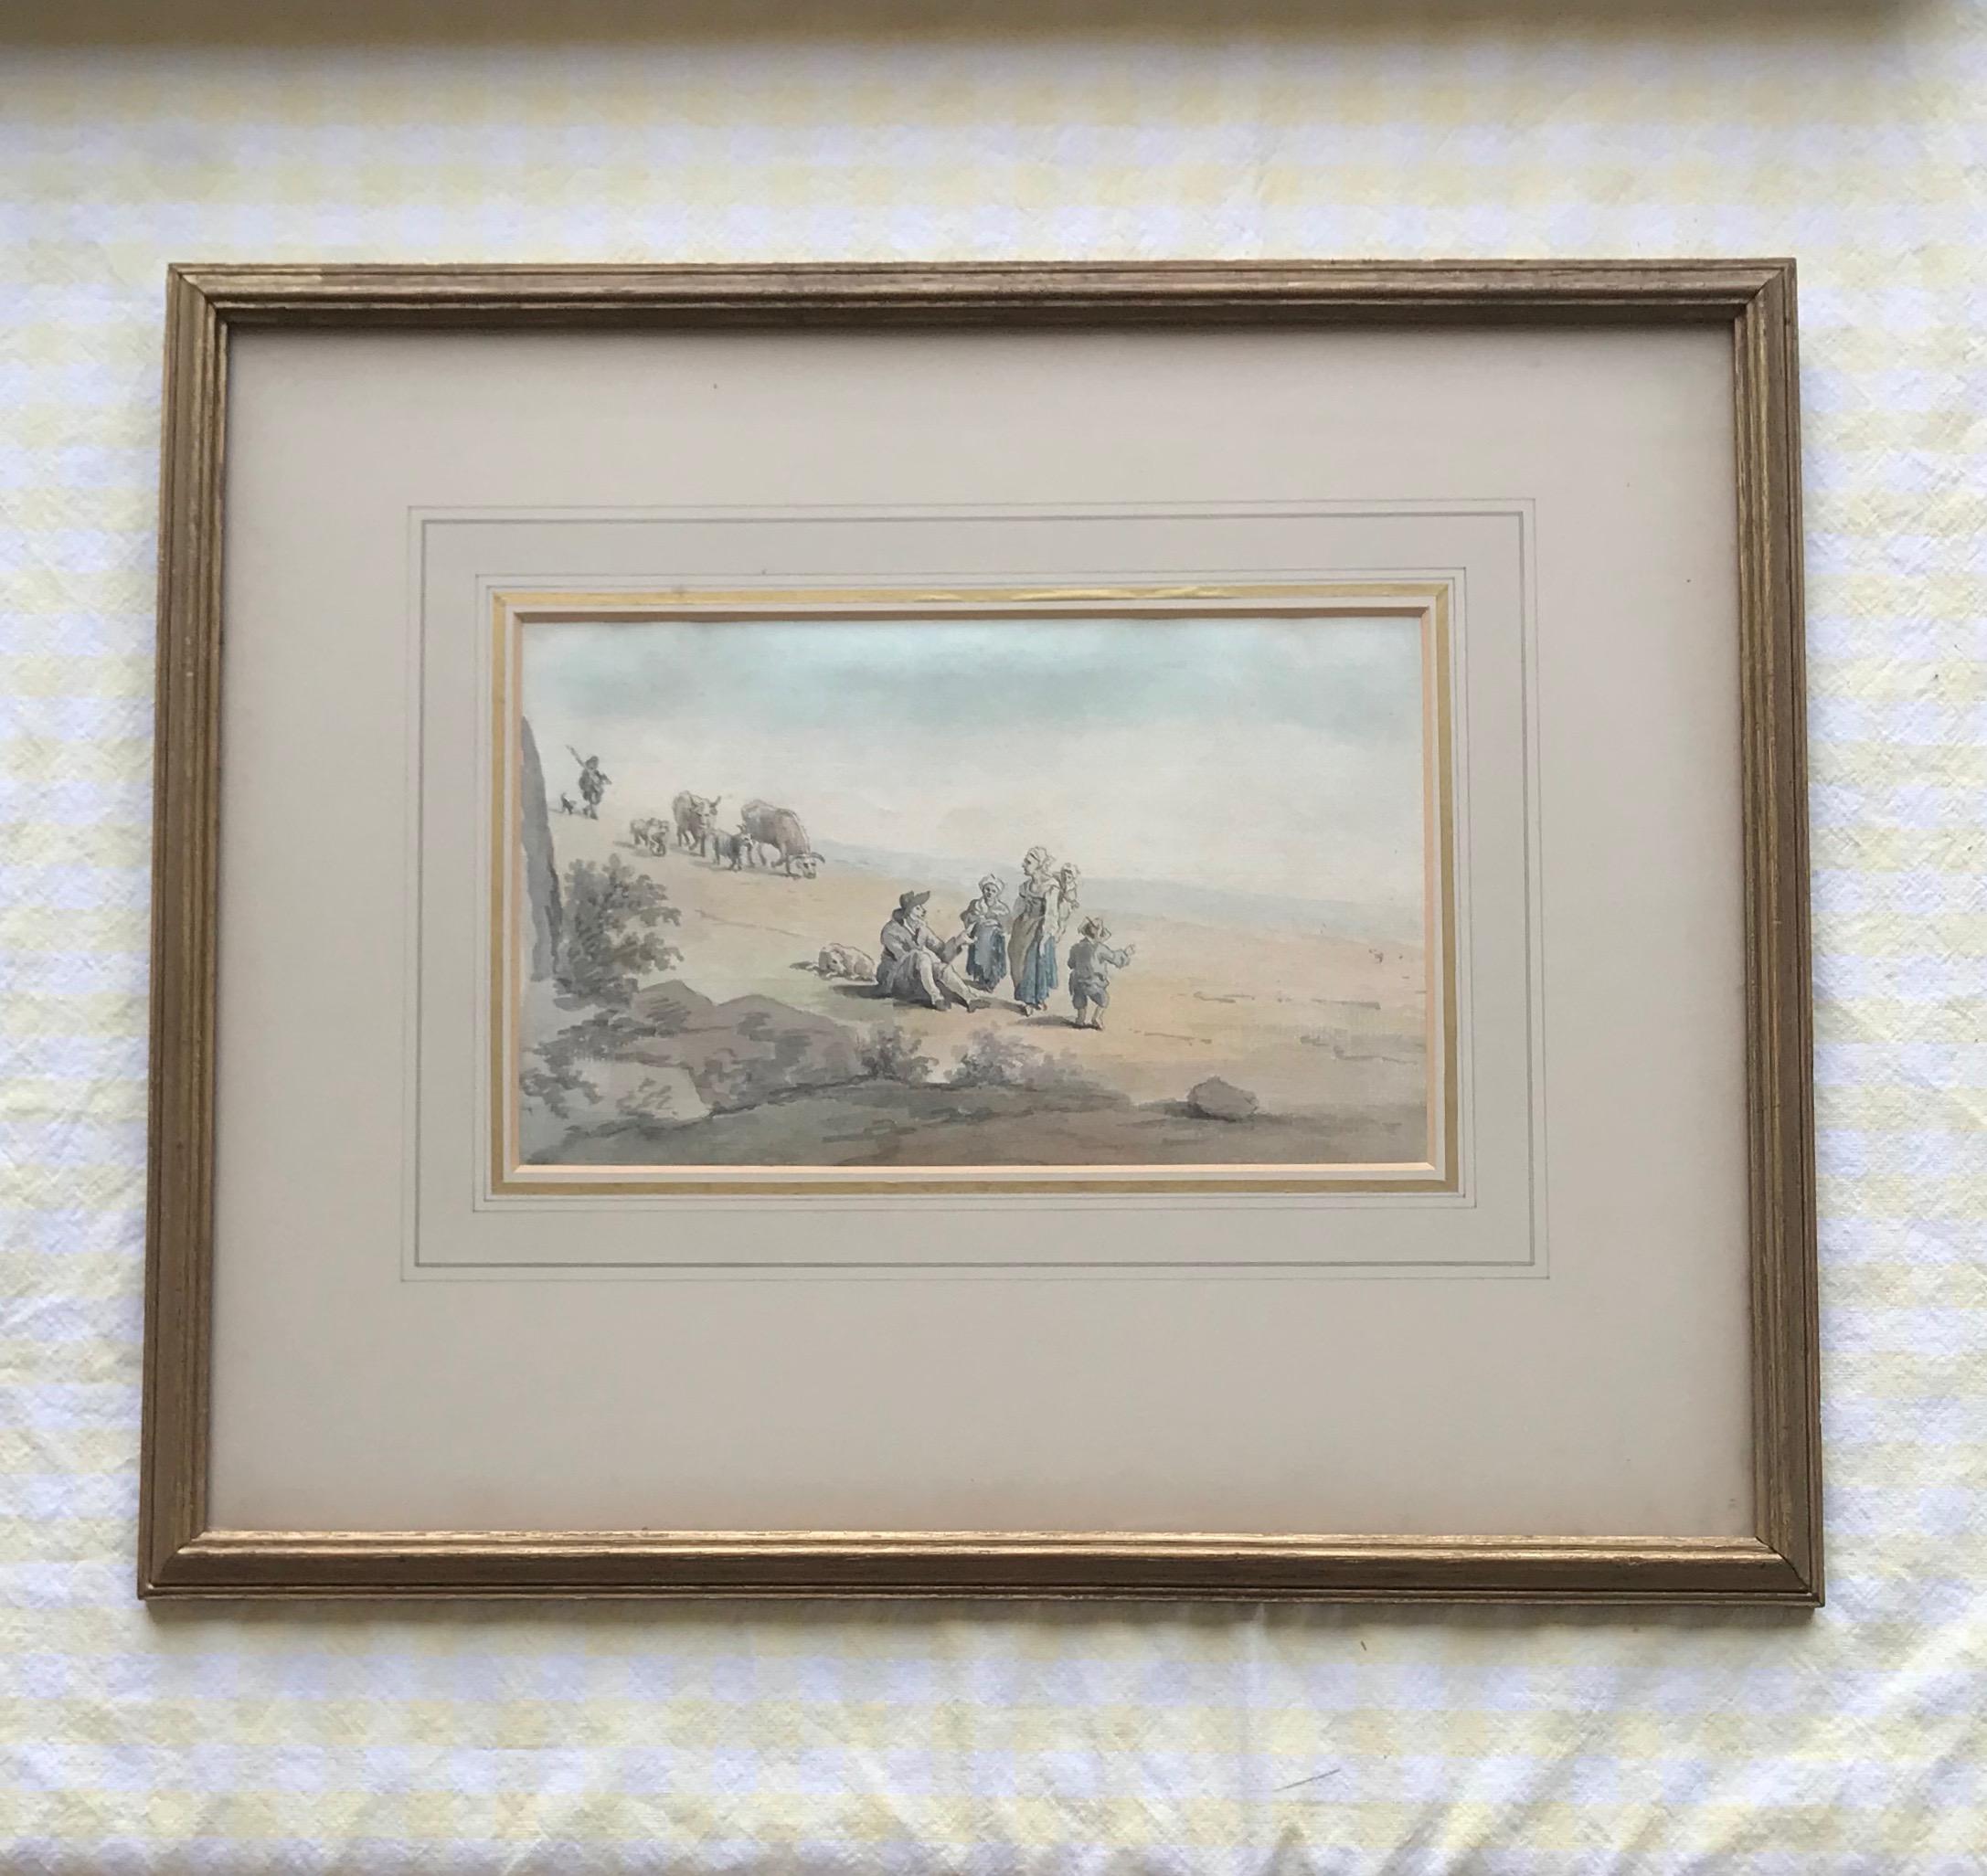 Attributed to Peter Le Cave, 18th Century watercolor on laid paper, rustic scene 5